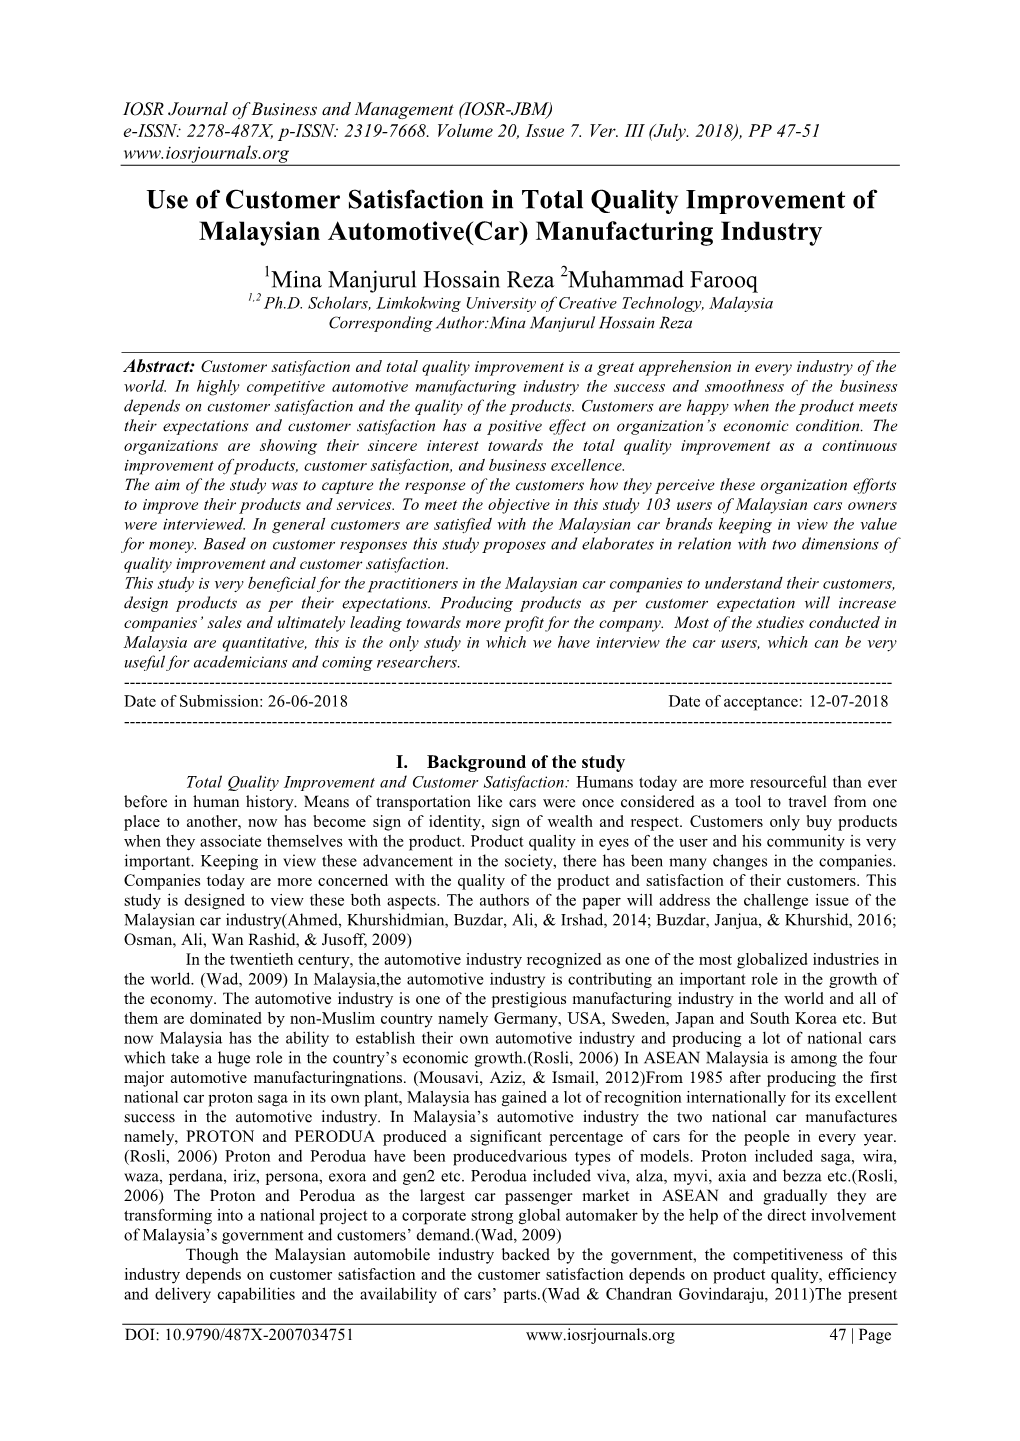 Use of Customer Satisfaction in Total Quality Improvement of Malaysian Automotive(Car) Manufacturing Industry